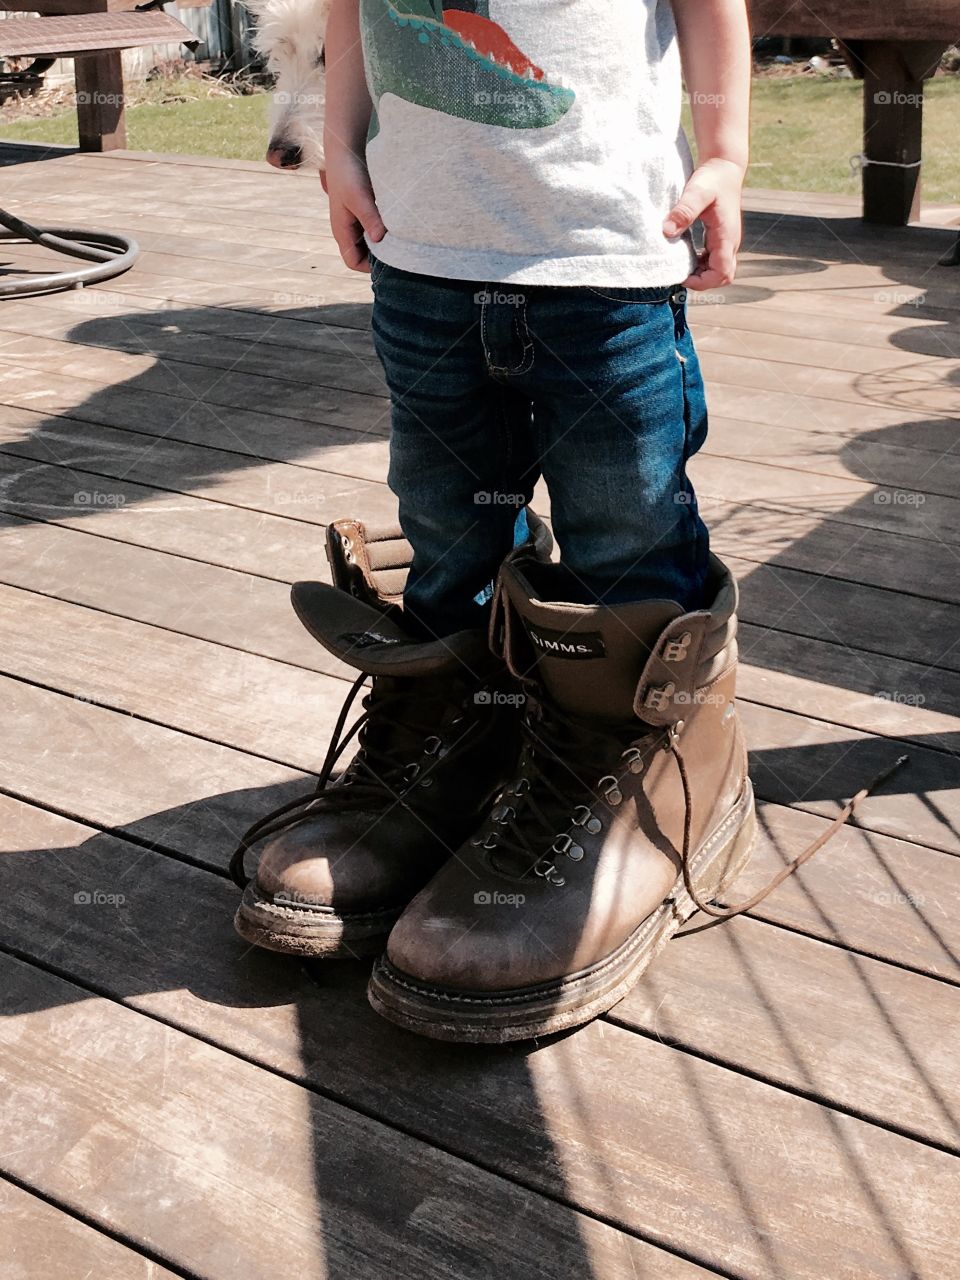 A walk in Grandpa's boots gives you perspective. 